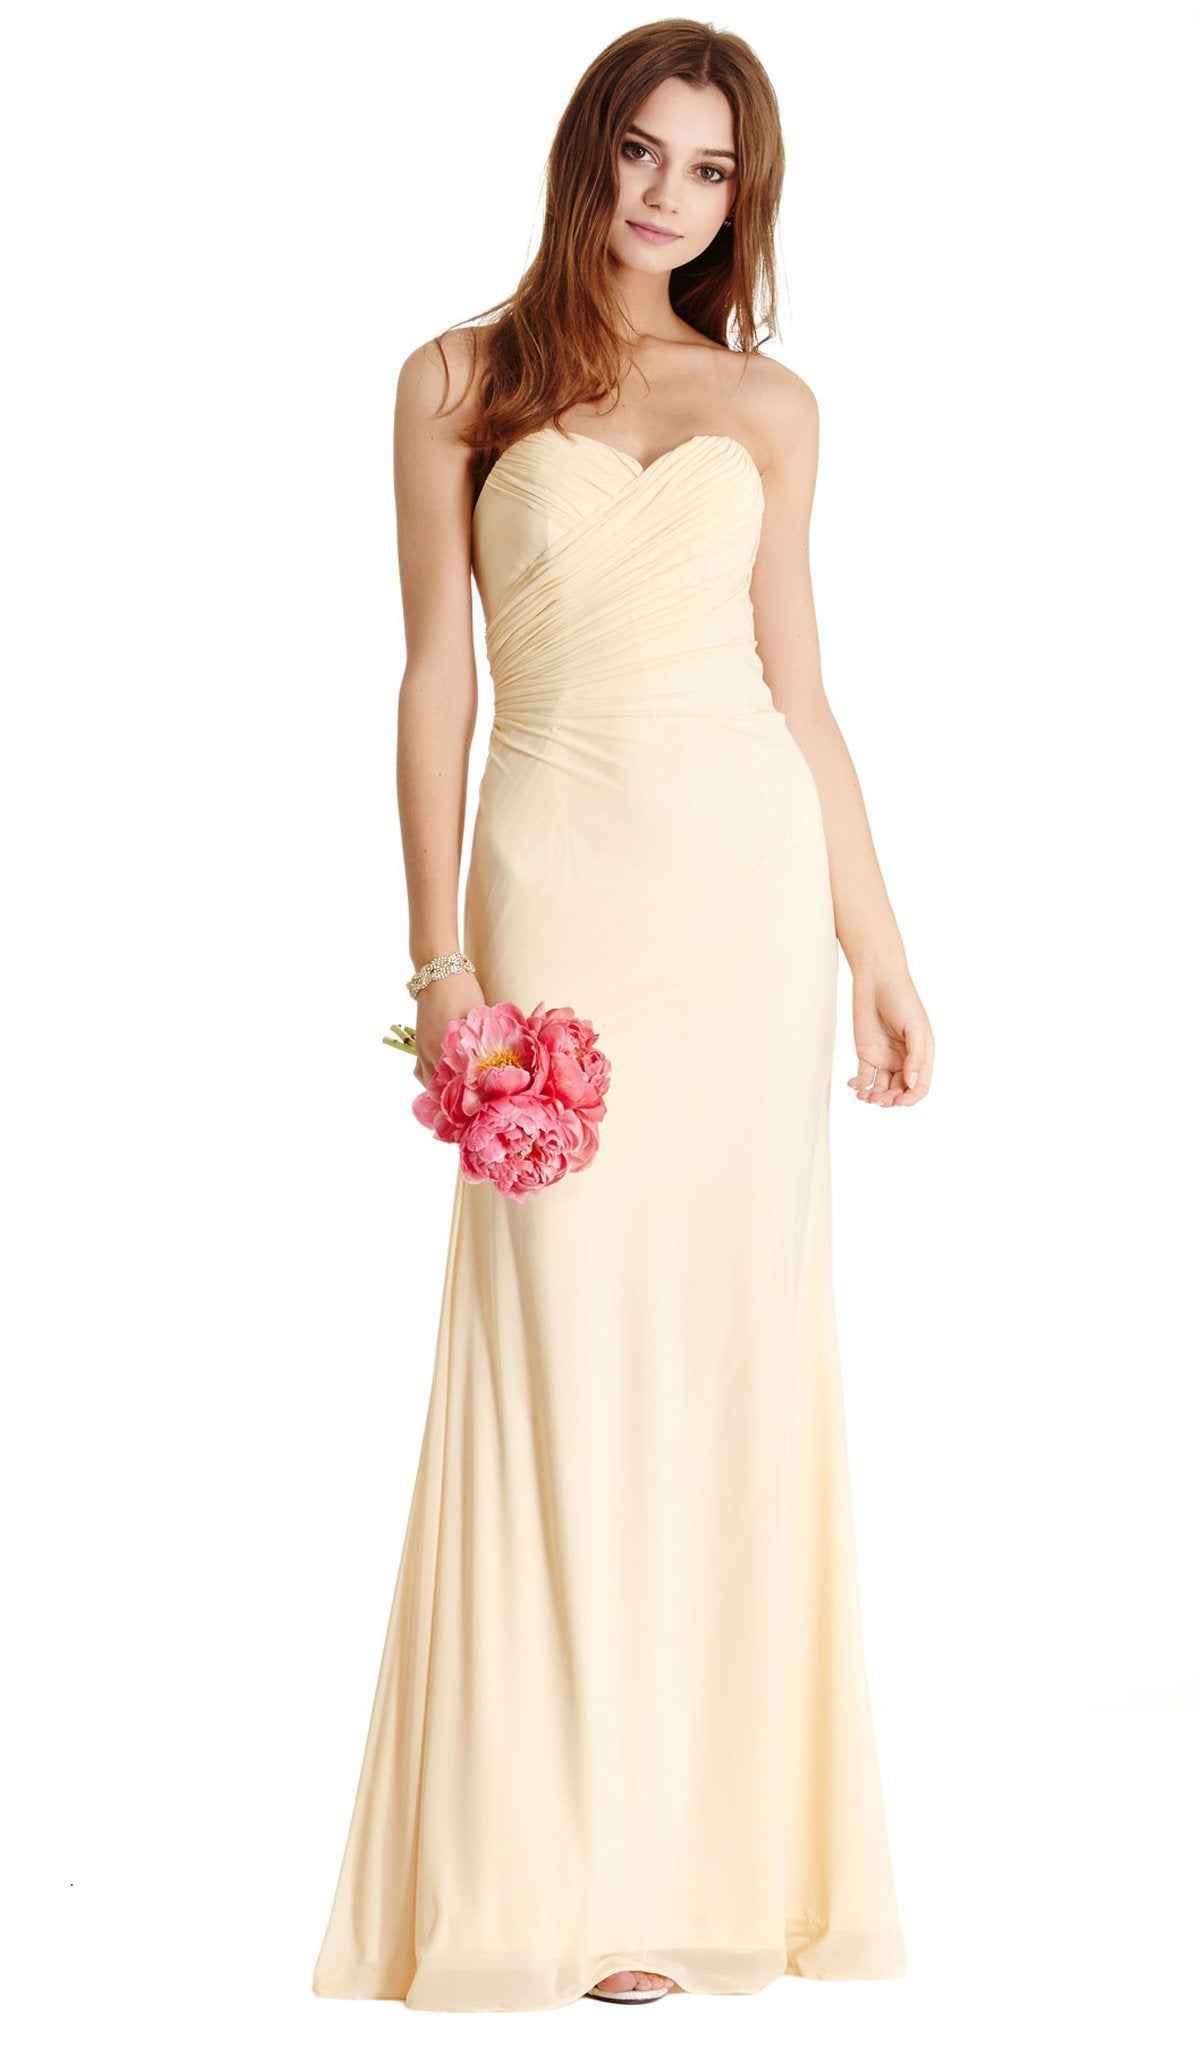 Image of Aspeed Design - Ruched Sweetheart Evening Sheath Dress